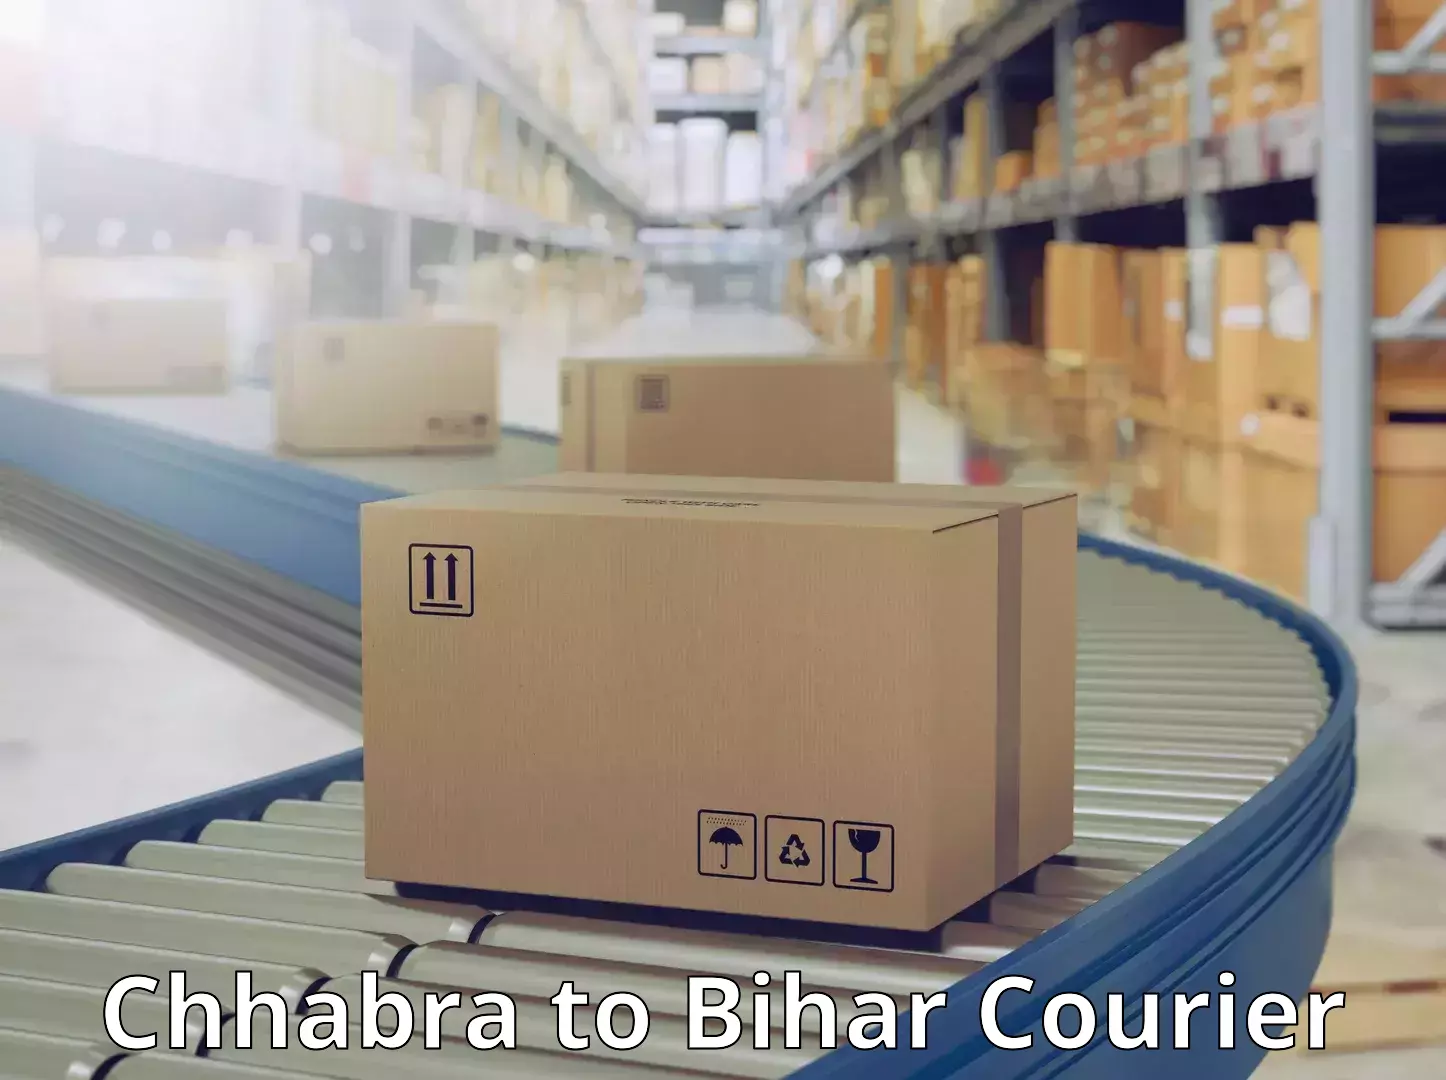 24-hour courier service Chhabra to Bihar